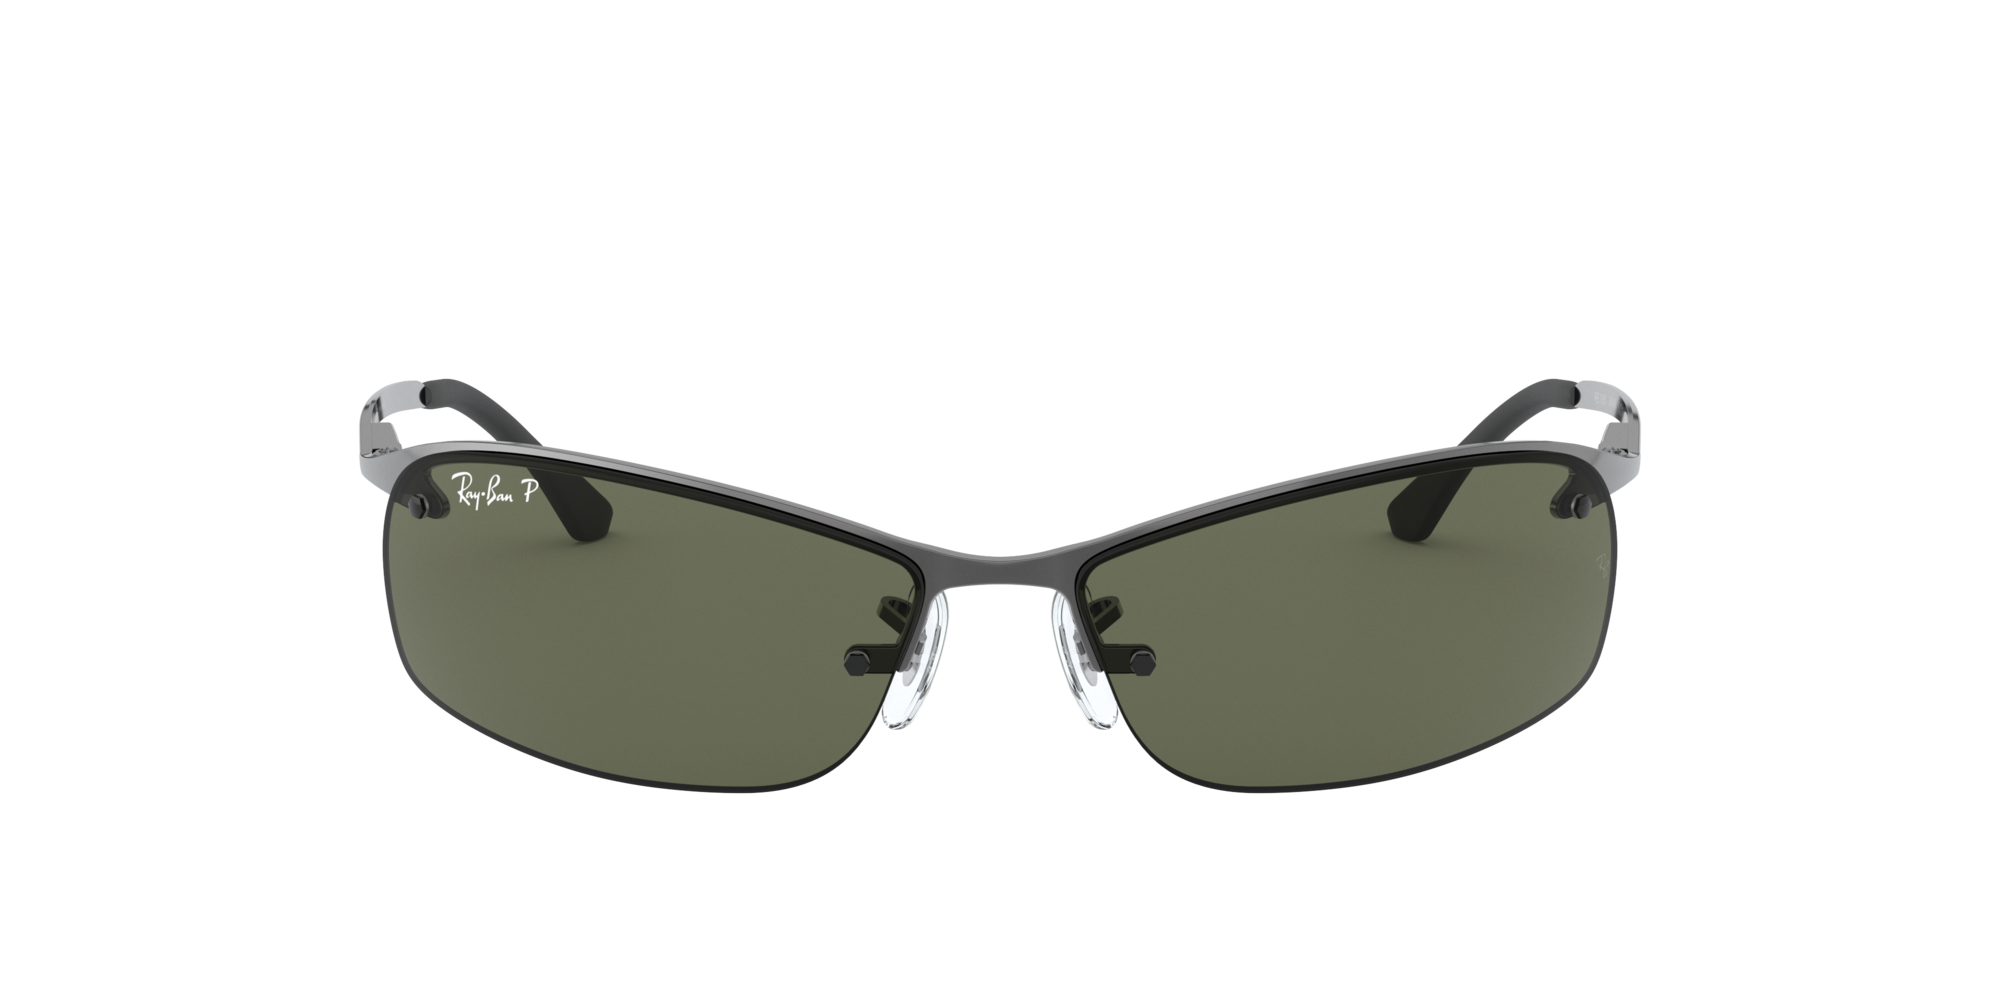 [products.image.front] Ray-Ban Polarizado RB3183 004/9A